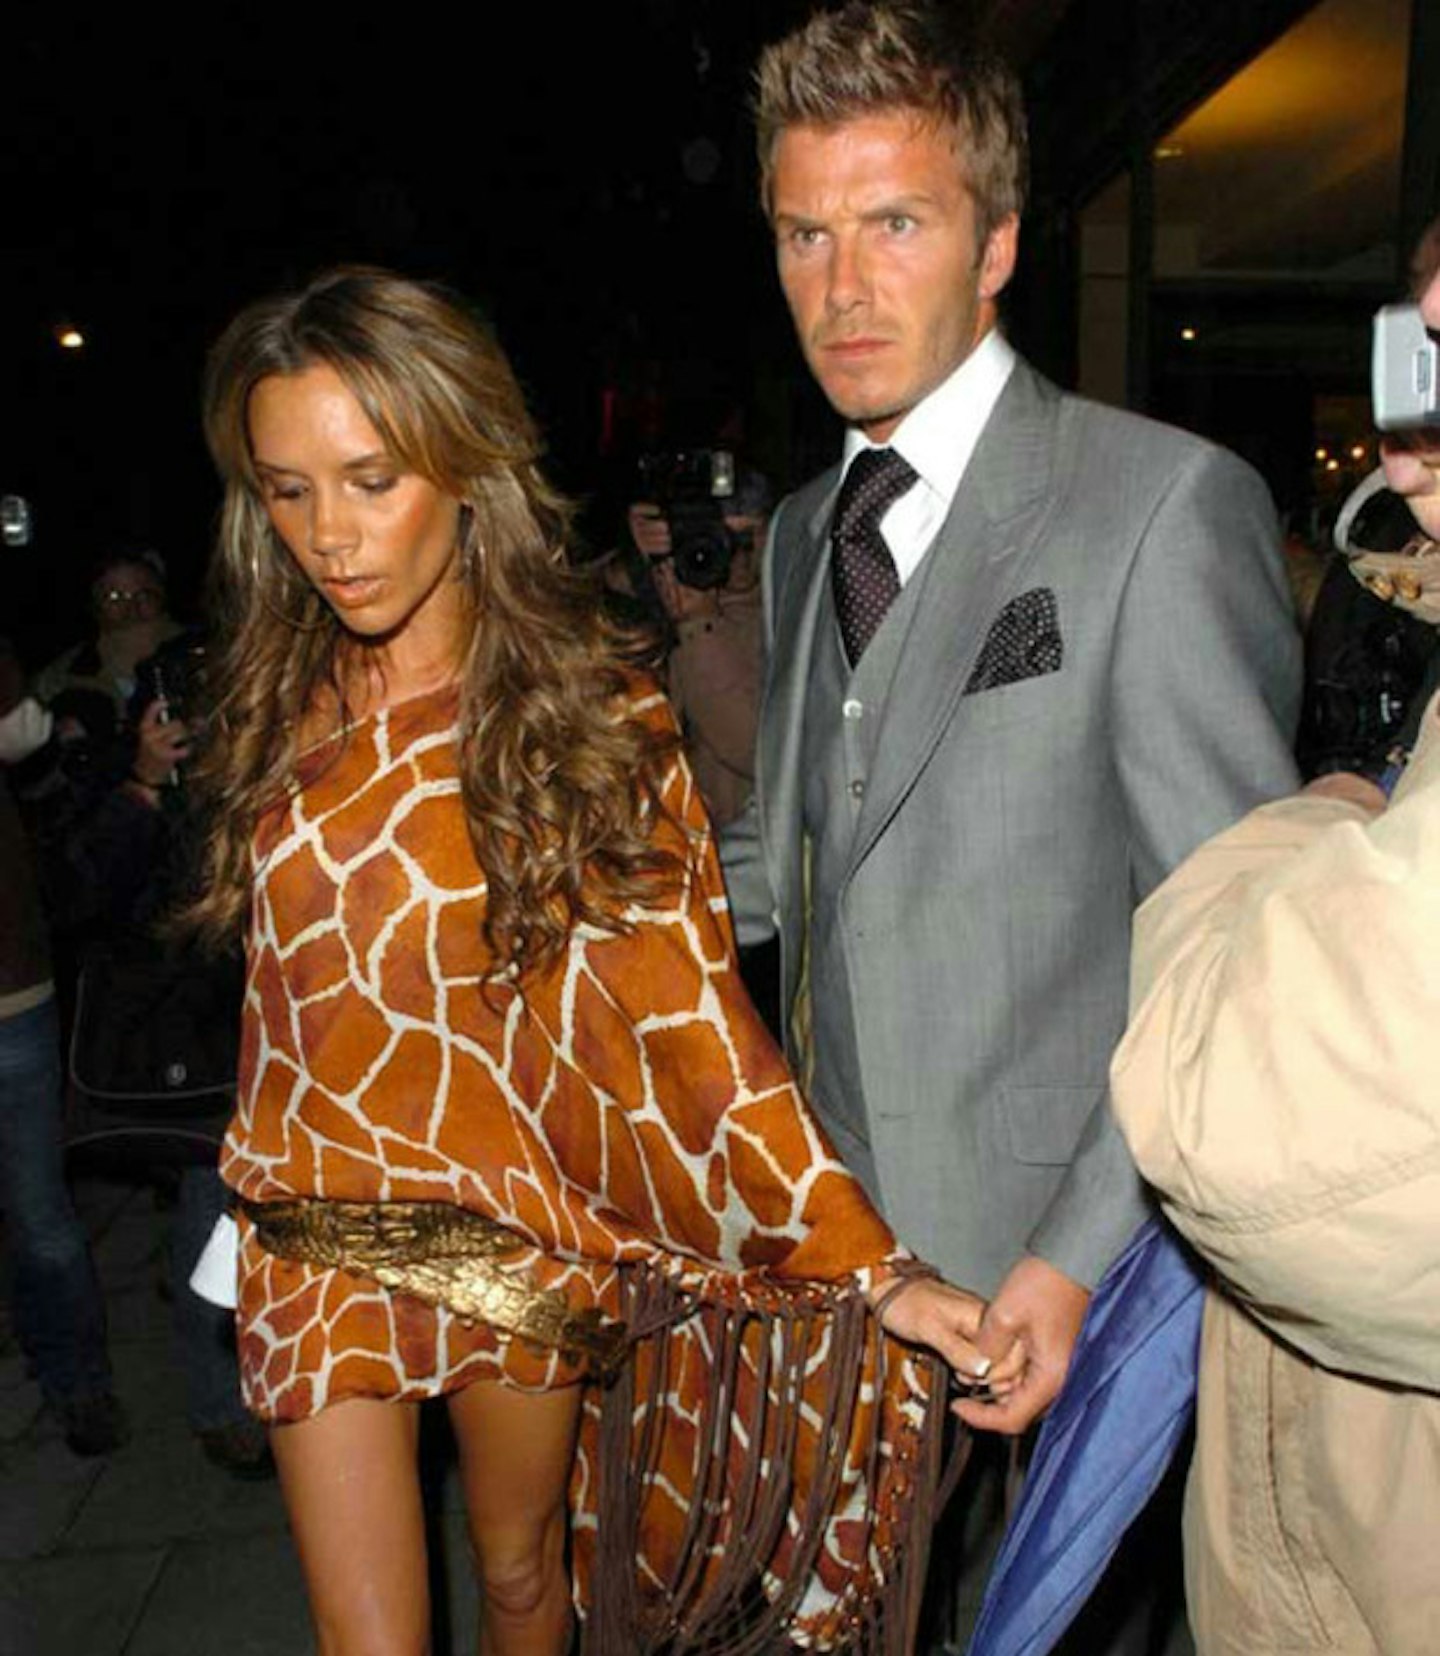 In fairness, Becks actually looks OK here. But what's up with VB's jungle-inspired number?